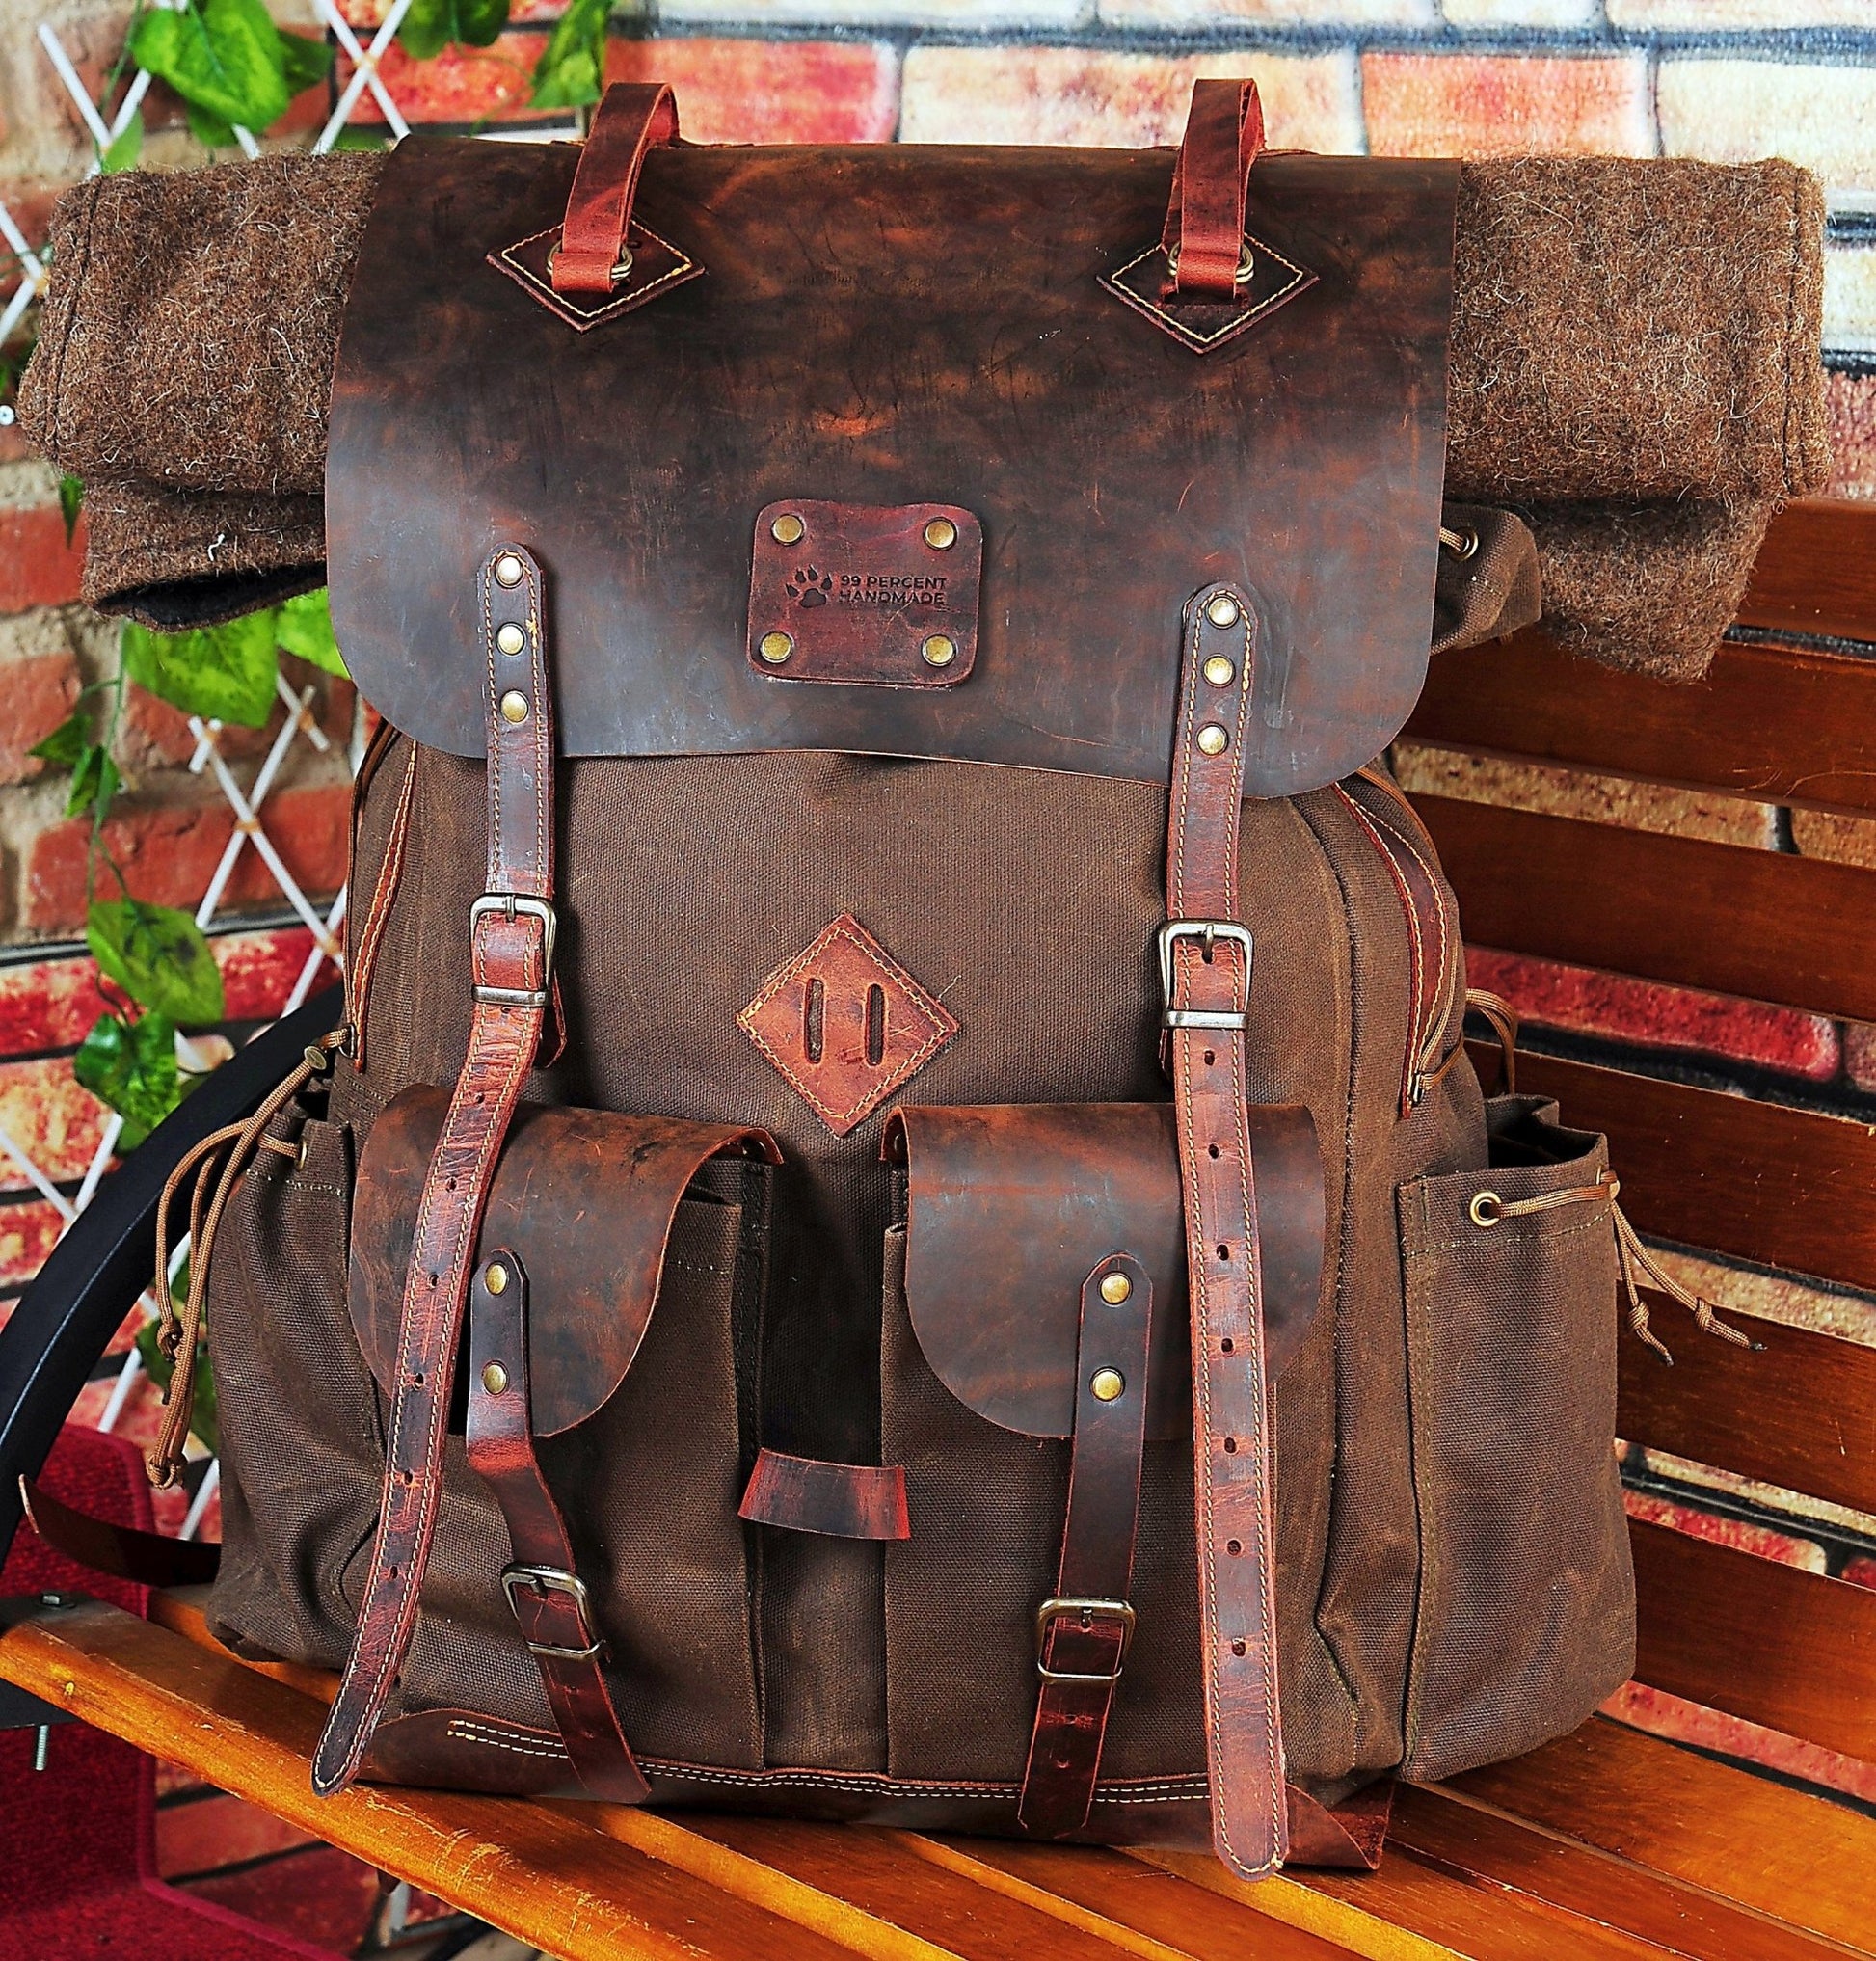 Waxed Canvas Backpack. Travel Bushcraft Backpack With Leather